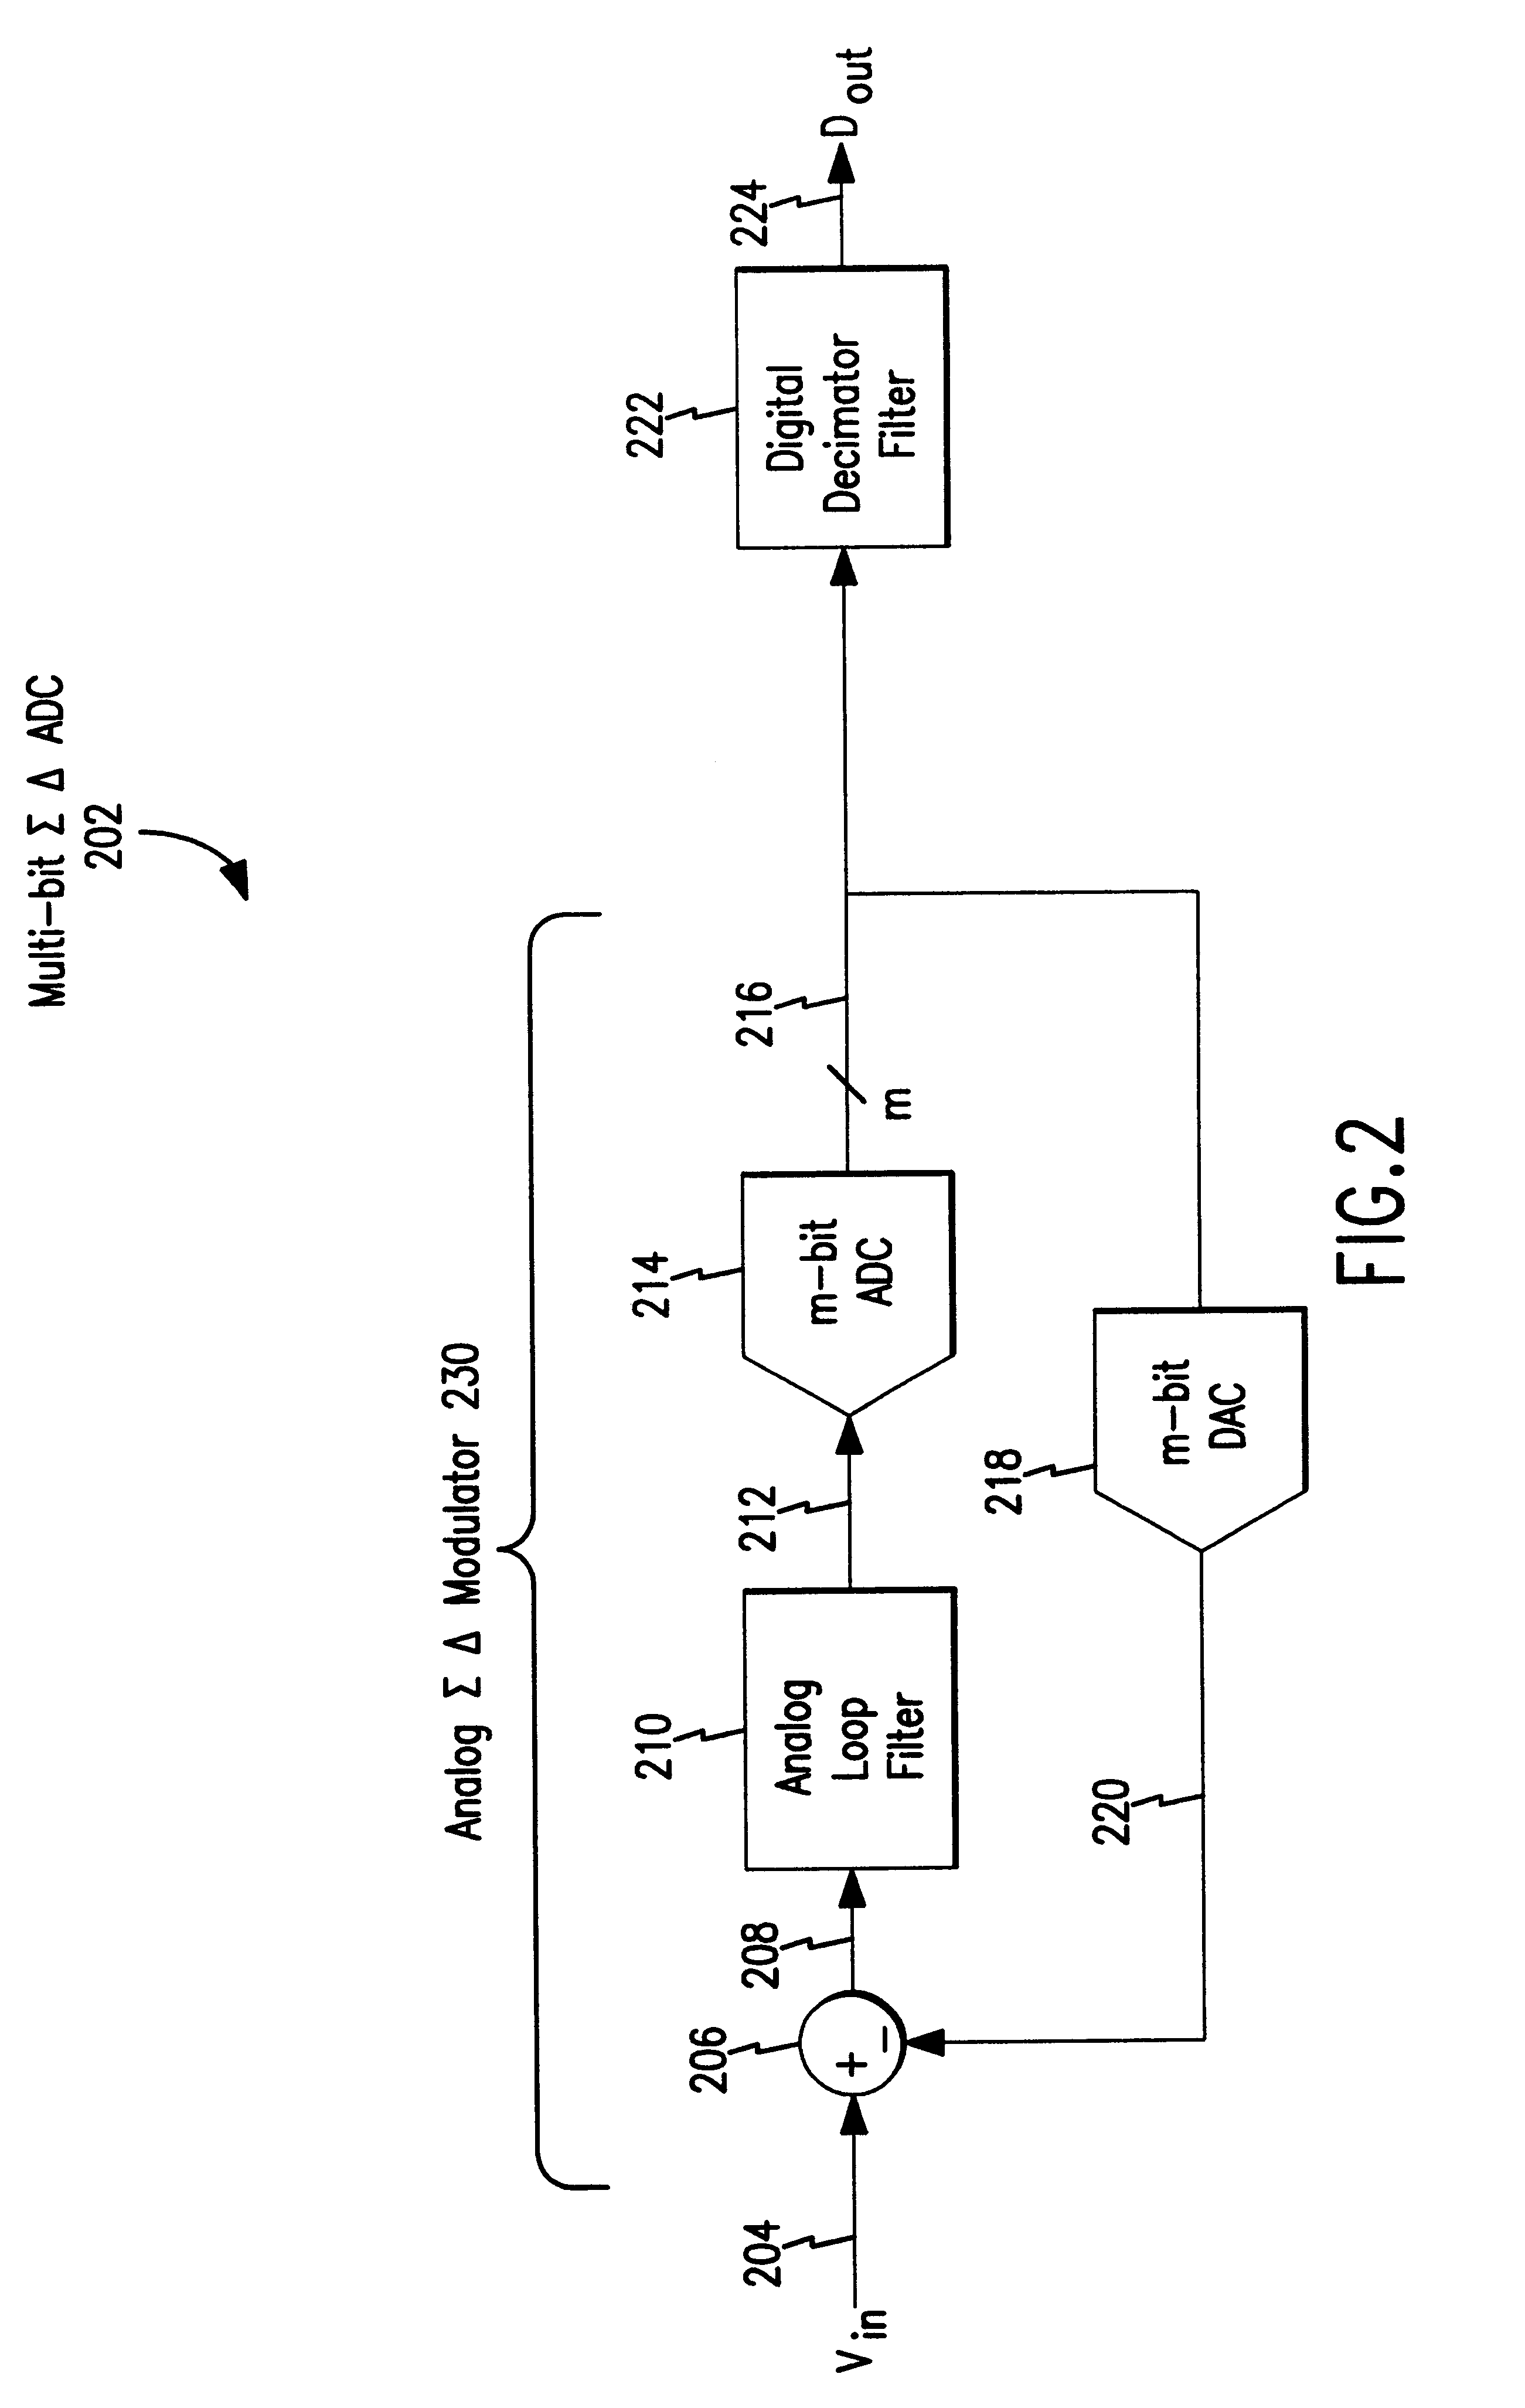 Method and apparatus for mismatched shaping of an oversampled converter